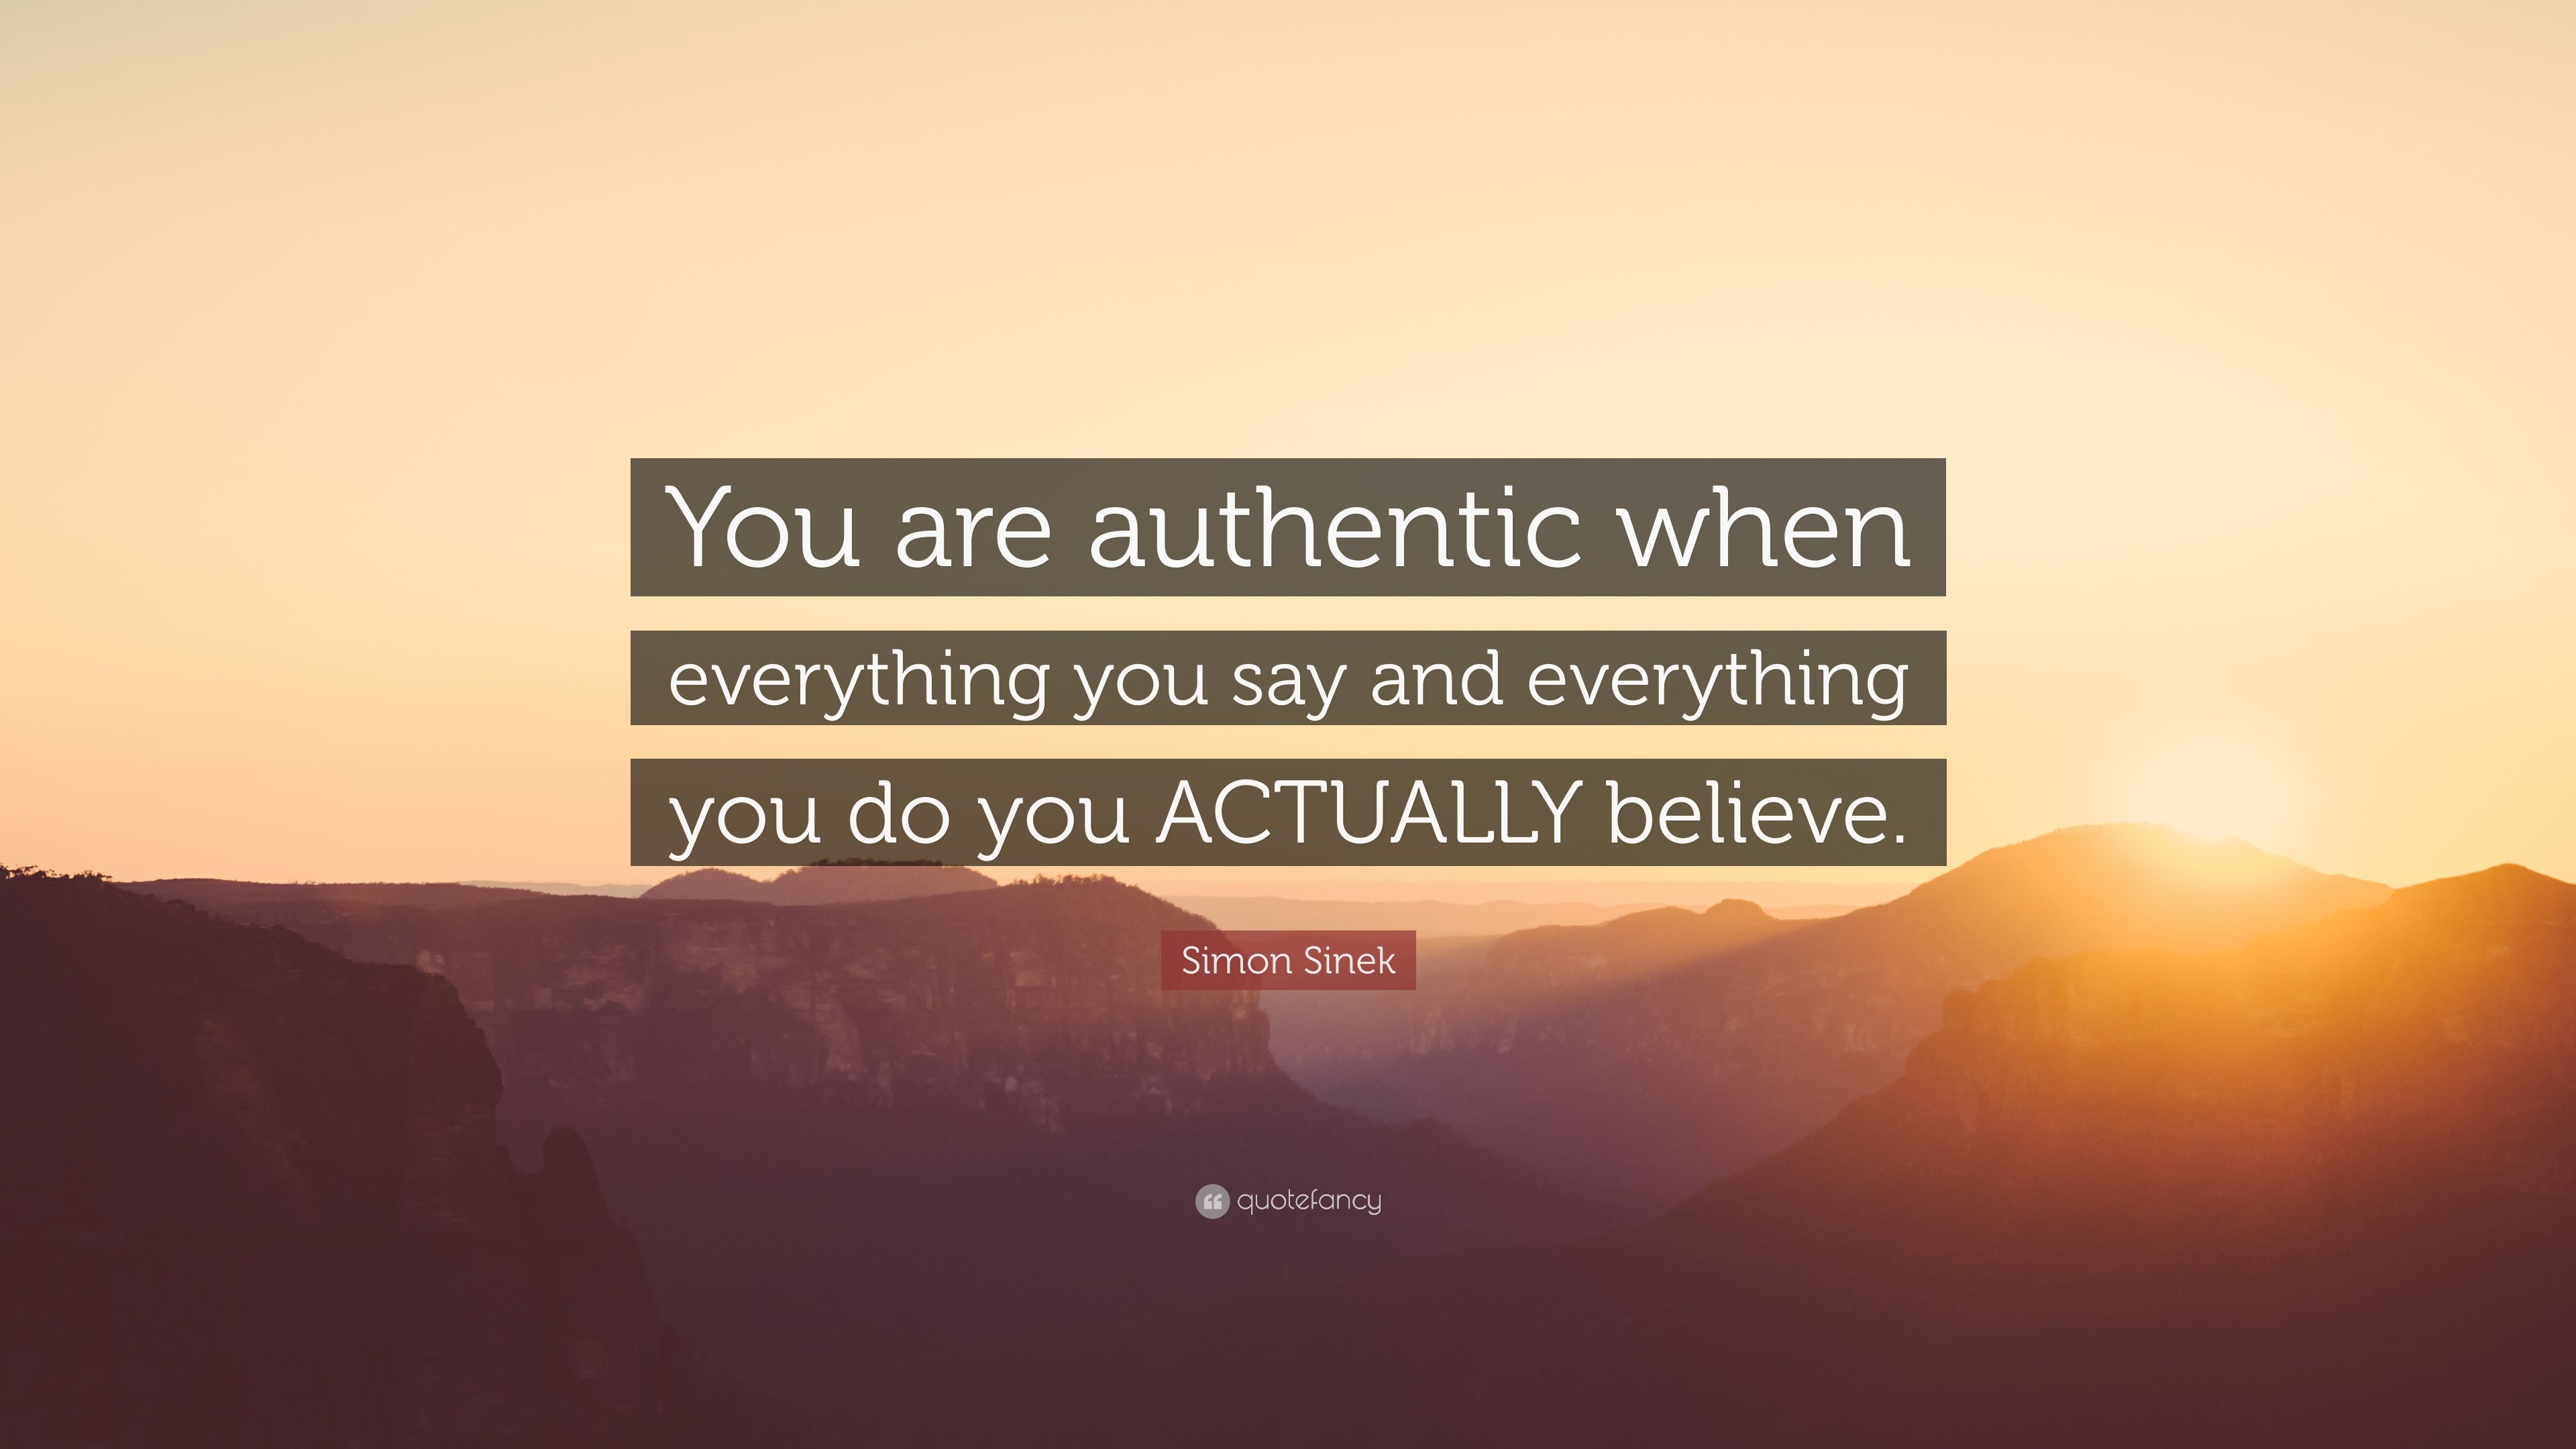 Simon Sinek Quote: “You are authentic when everything you say and everything you do you ACTUALLY believe.” (12 wallpaper)